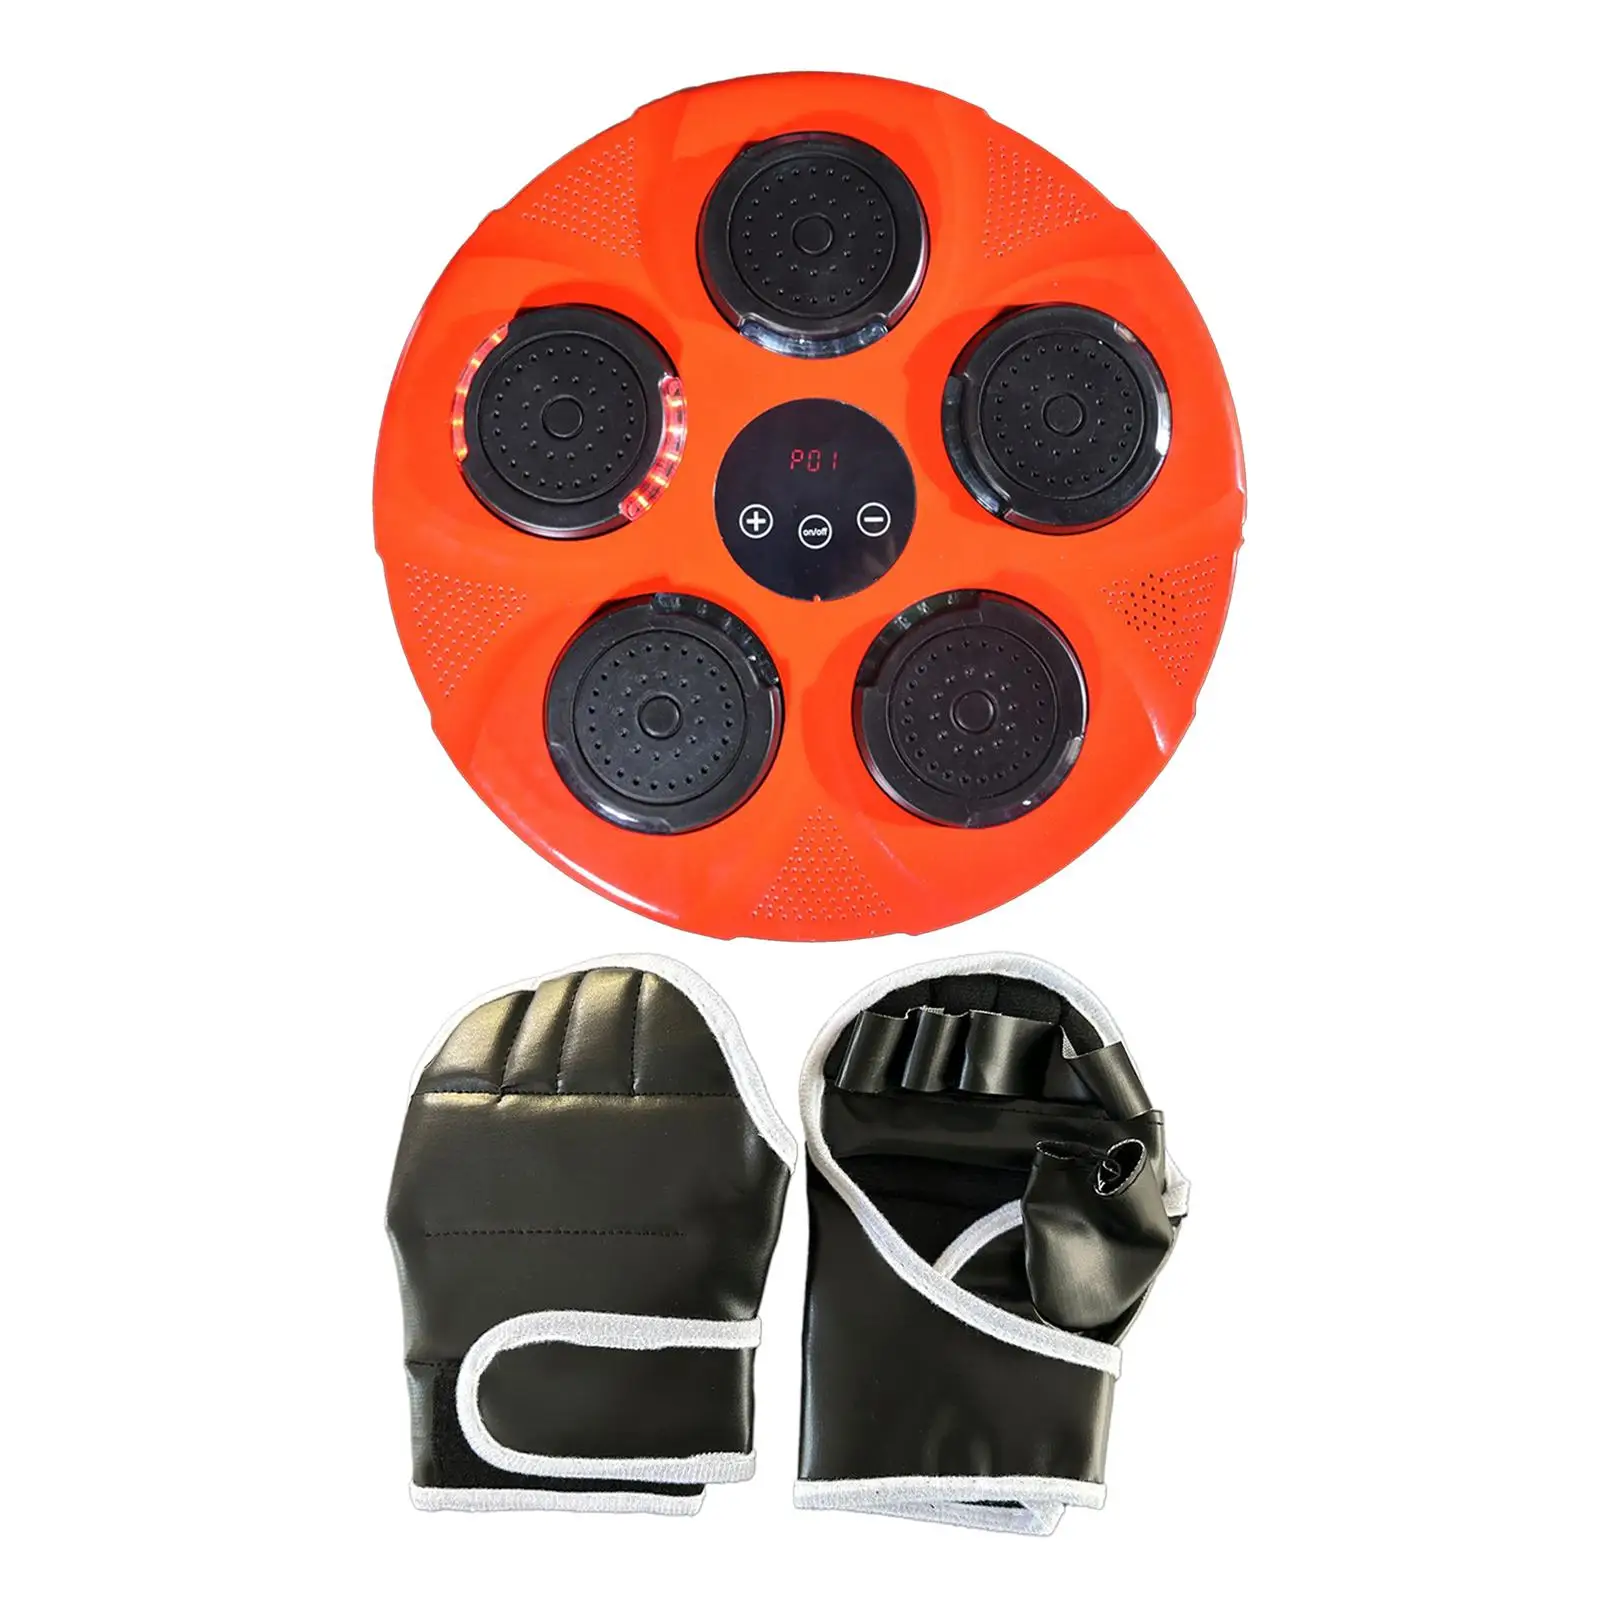 Music Boxing Machine Electronic Boxing Target Sandbag Musical Boxing Plate for Sports Home Gym Practice Improves Agility Workout